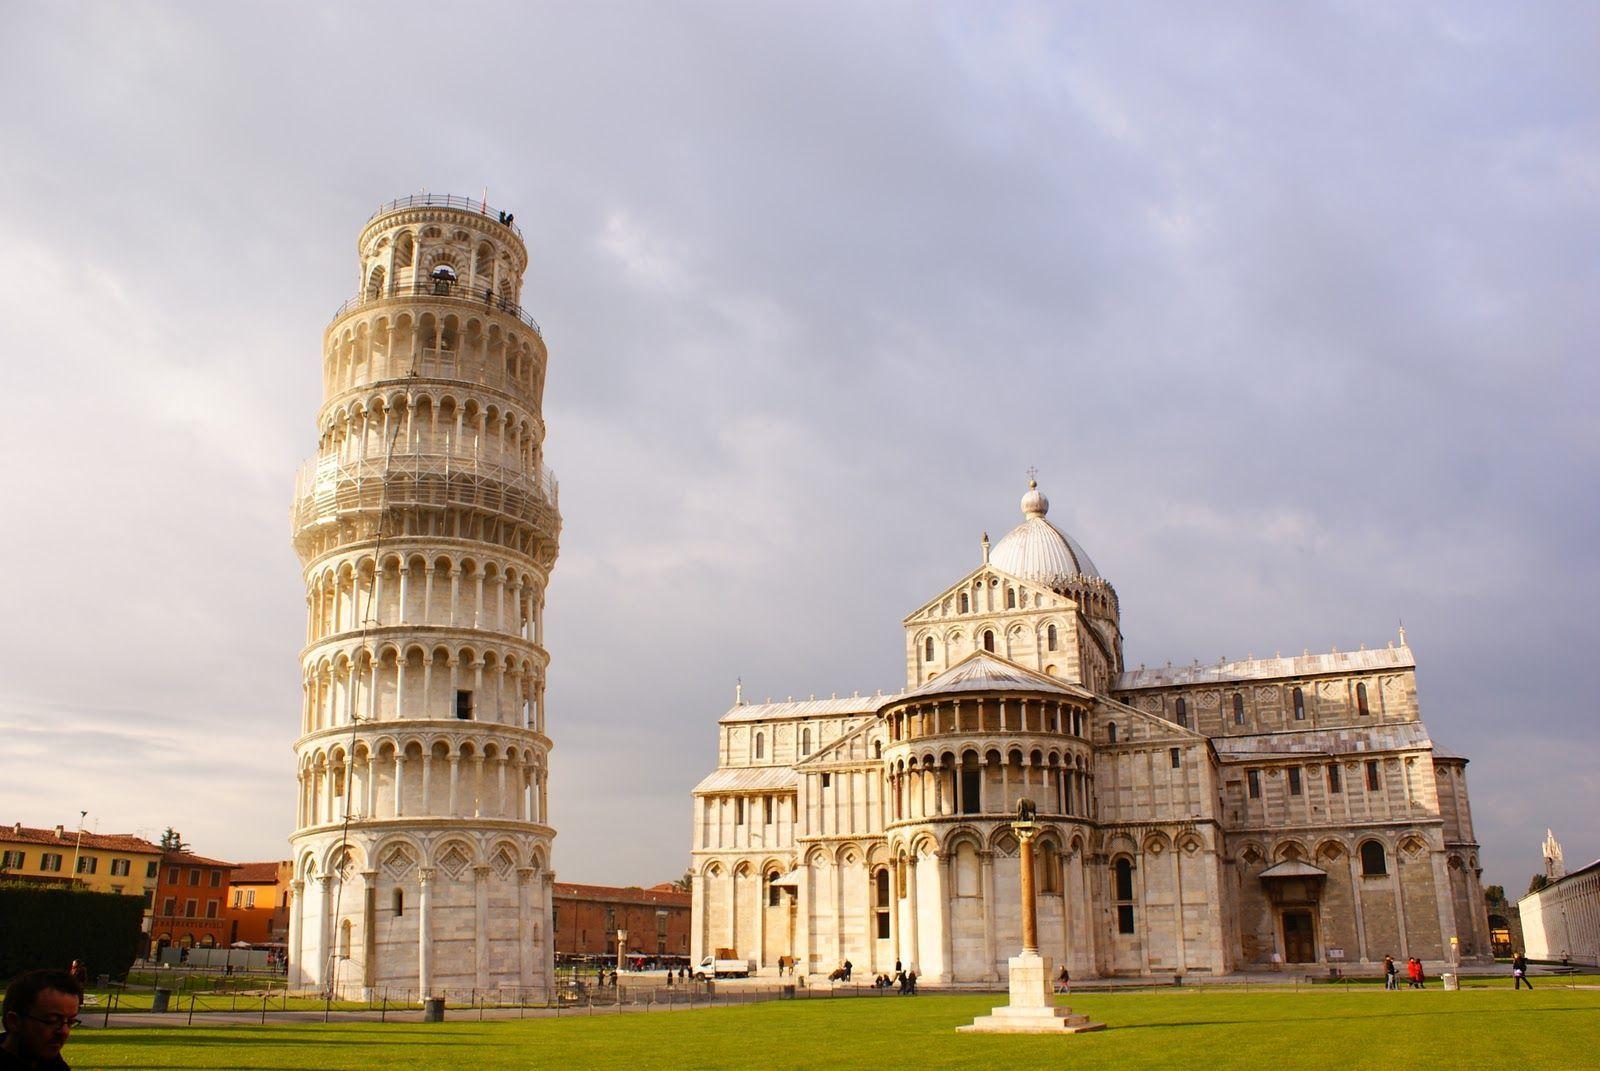 Visitor For Travel: Amazing Leaning Tower of Pisa, Italy HD Wallpaper